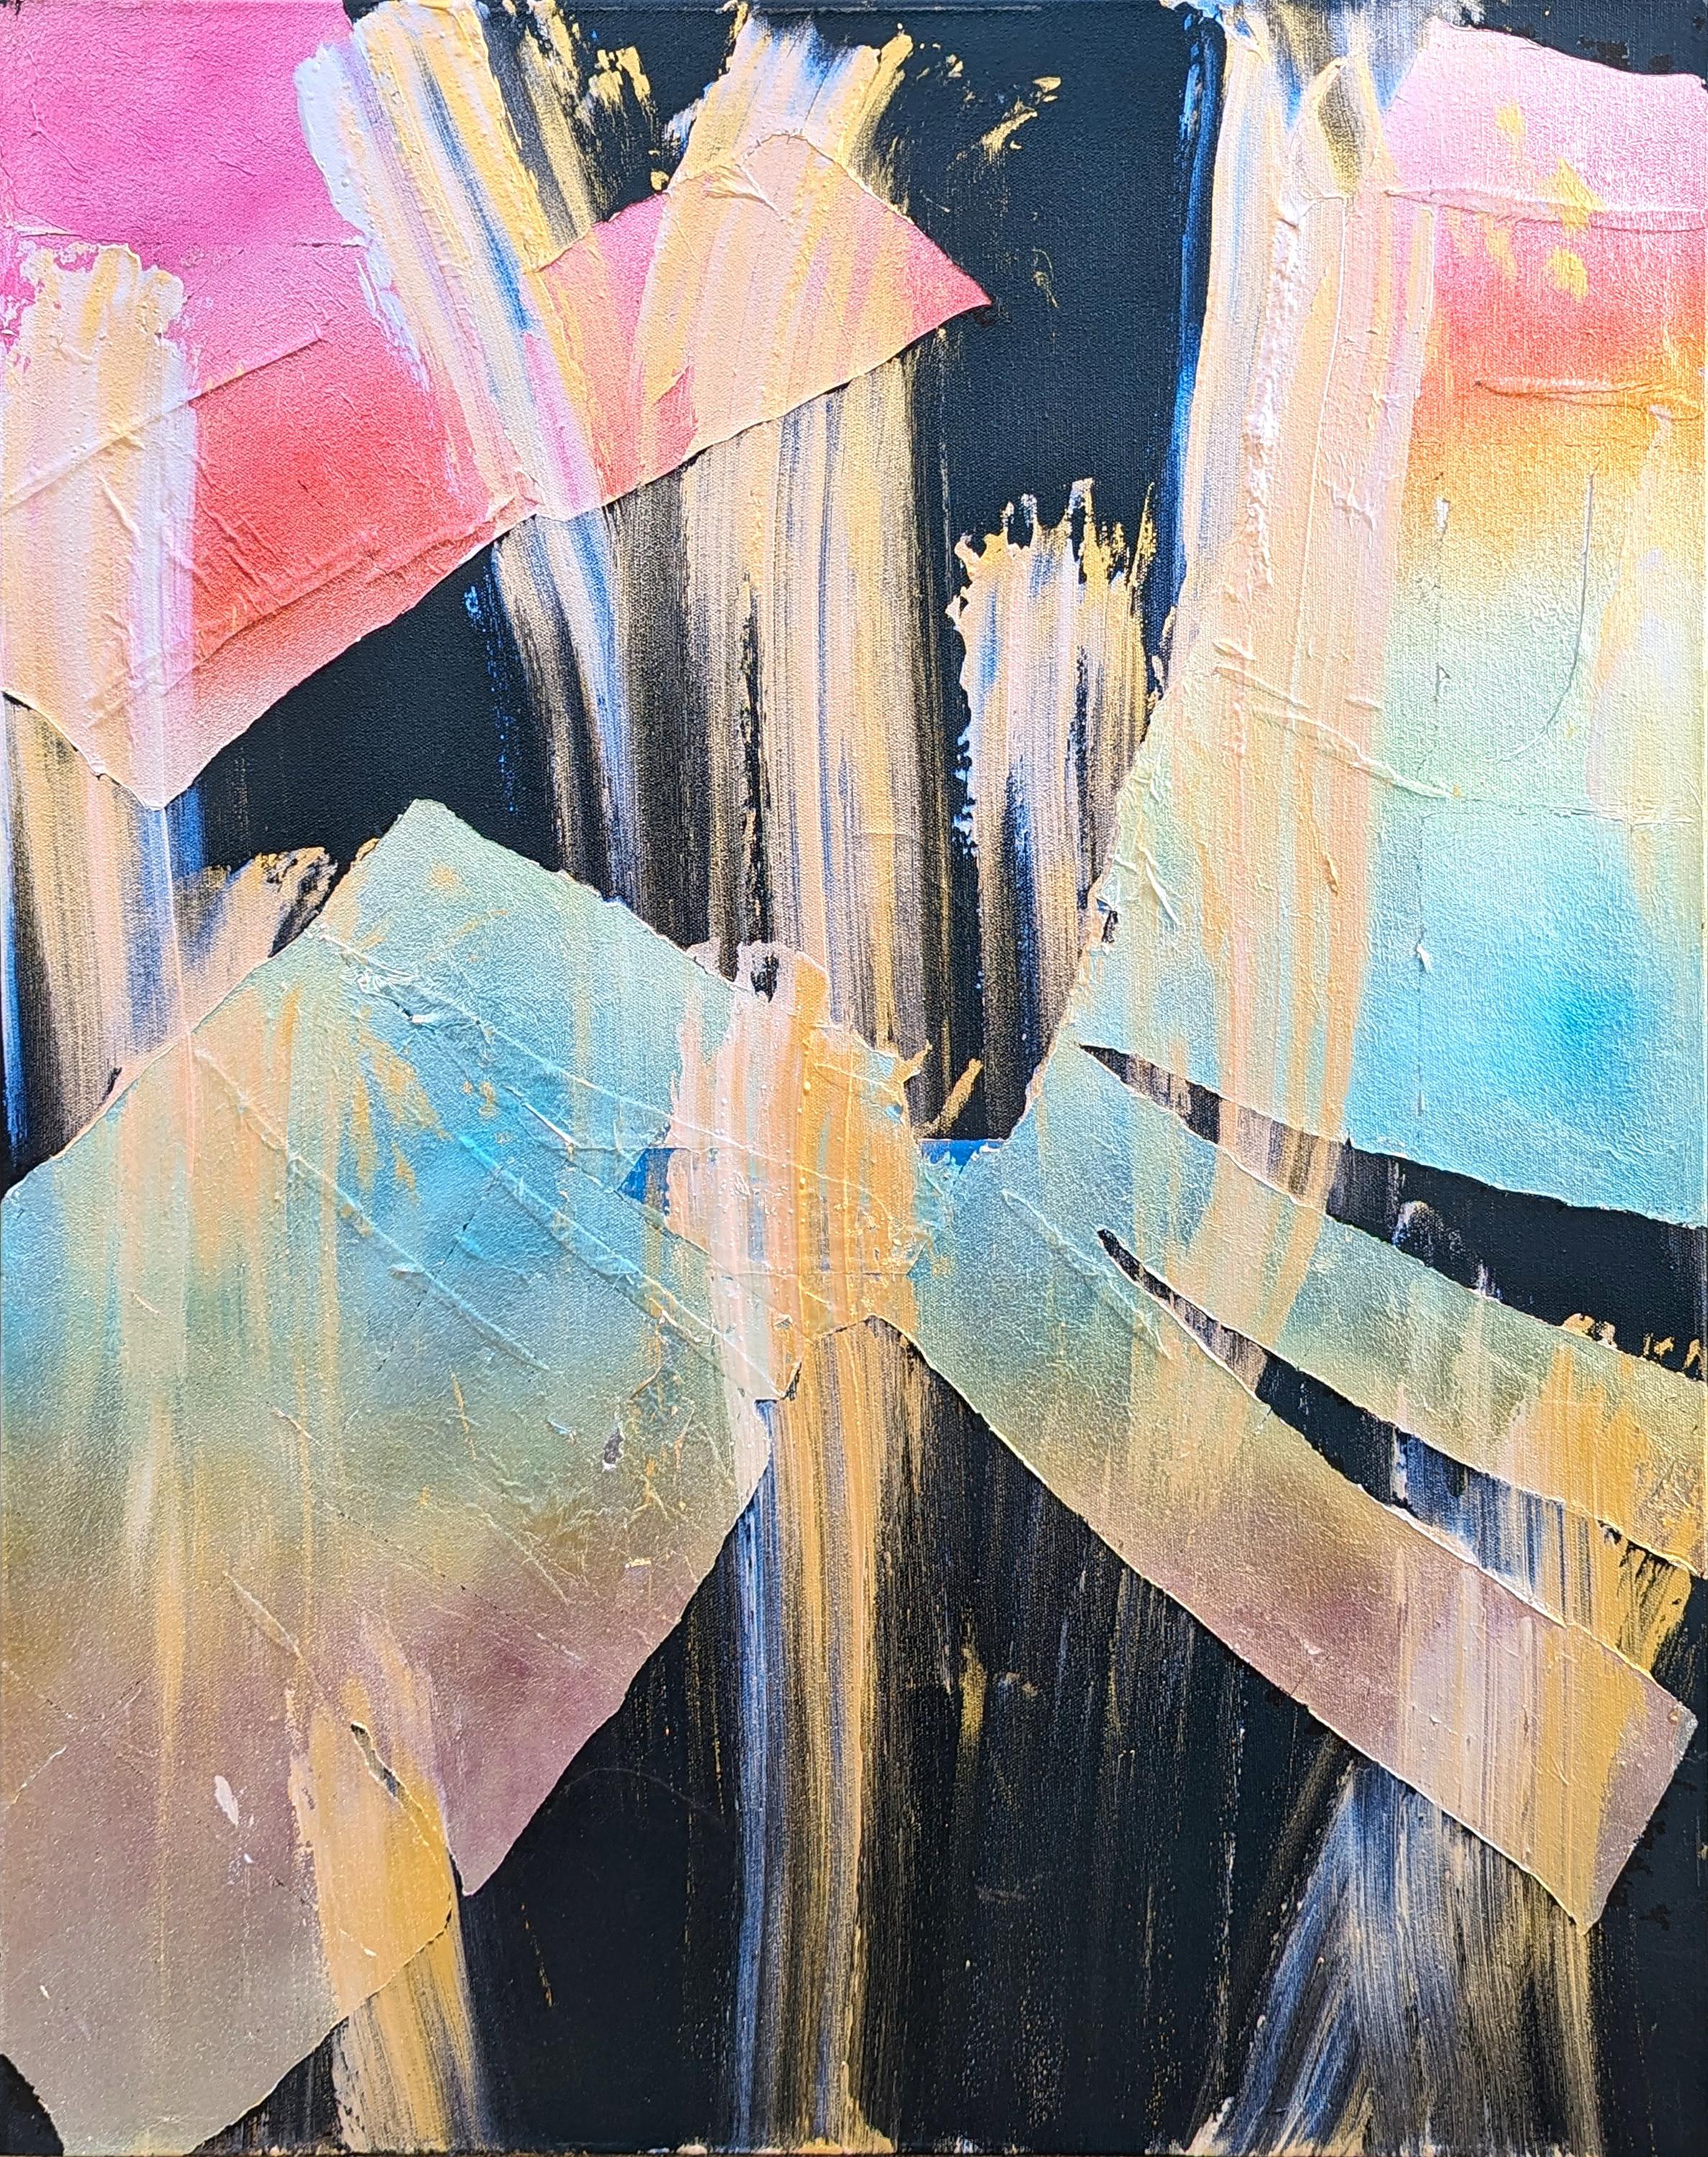 Colorful metallic gestural abstract painting by Brooklyn based artist Bret Shirley. The work features sweeping strokes of metallic blue, pink, and yellow set against a black background. Signed and dated on the reverse. Currently unframed, but